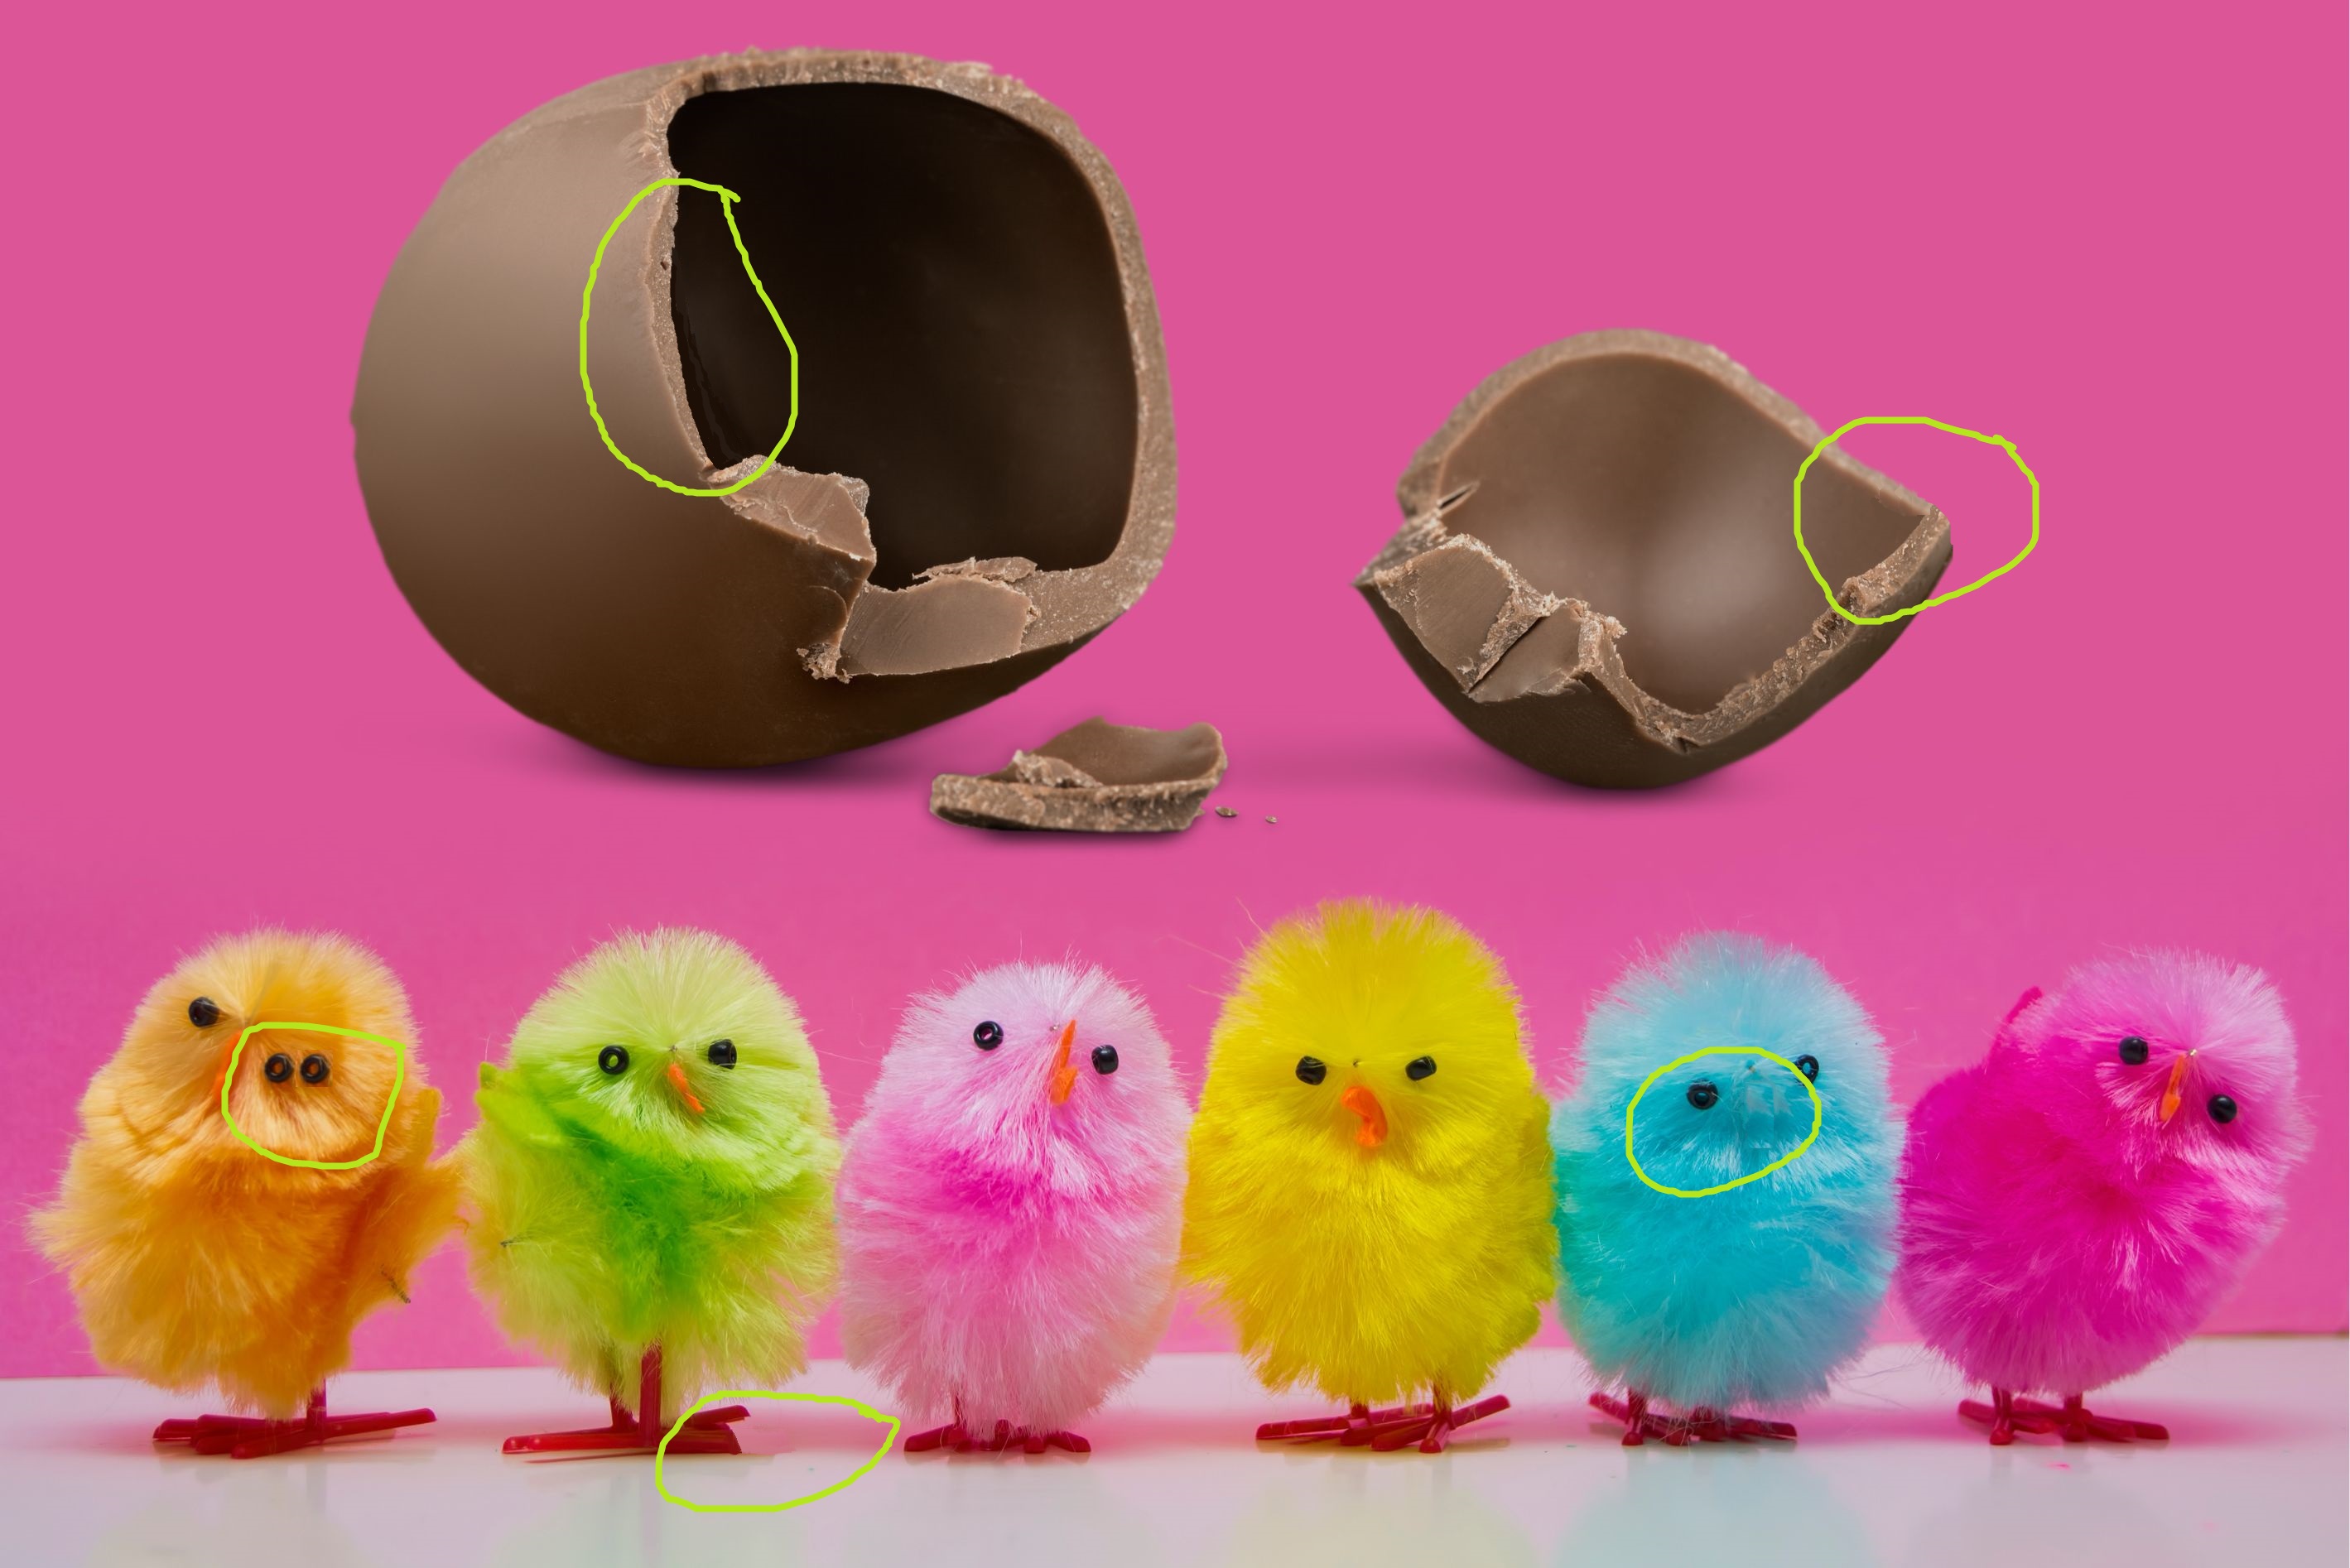 Broken Easter egg with pink background, hovering over Easter chicks of various colors